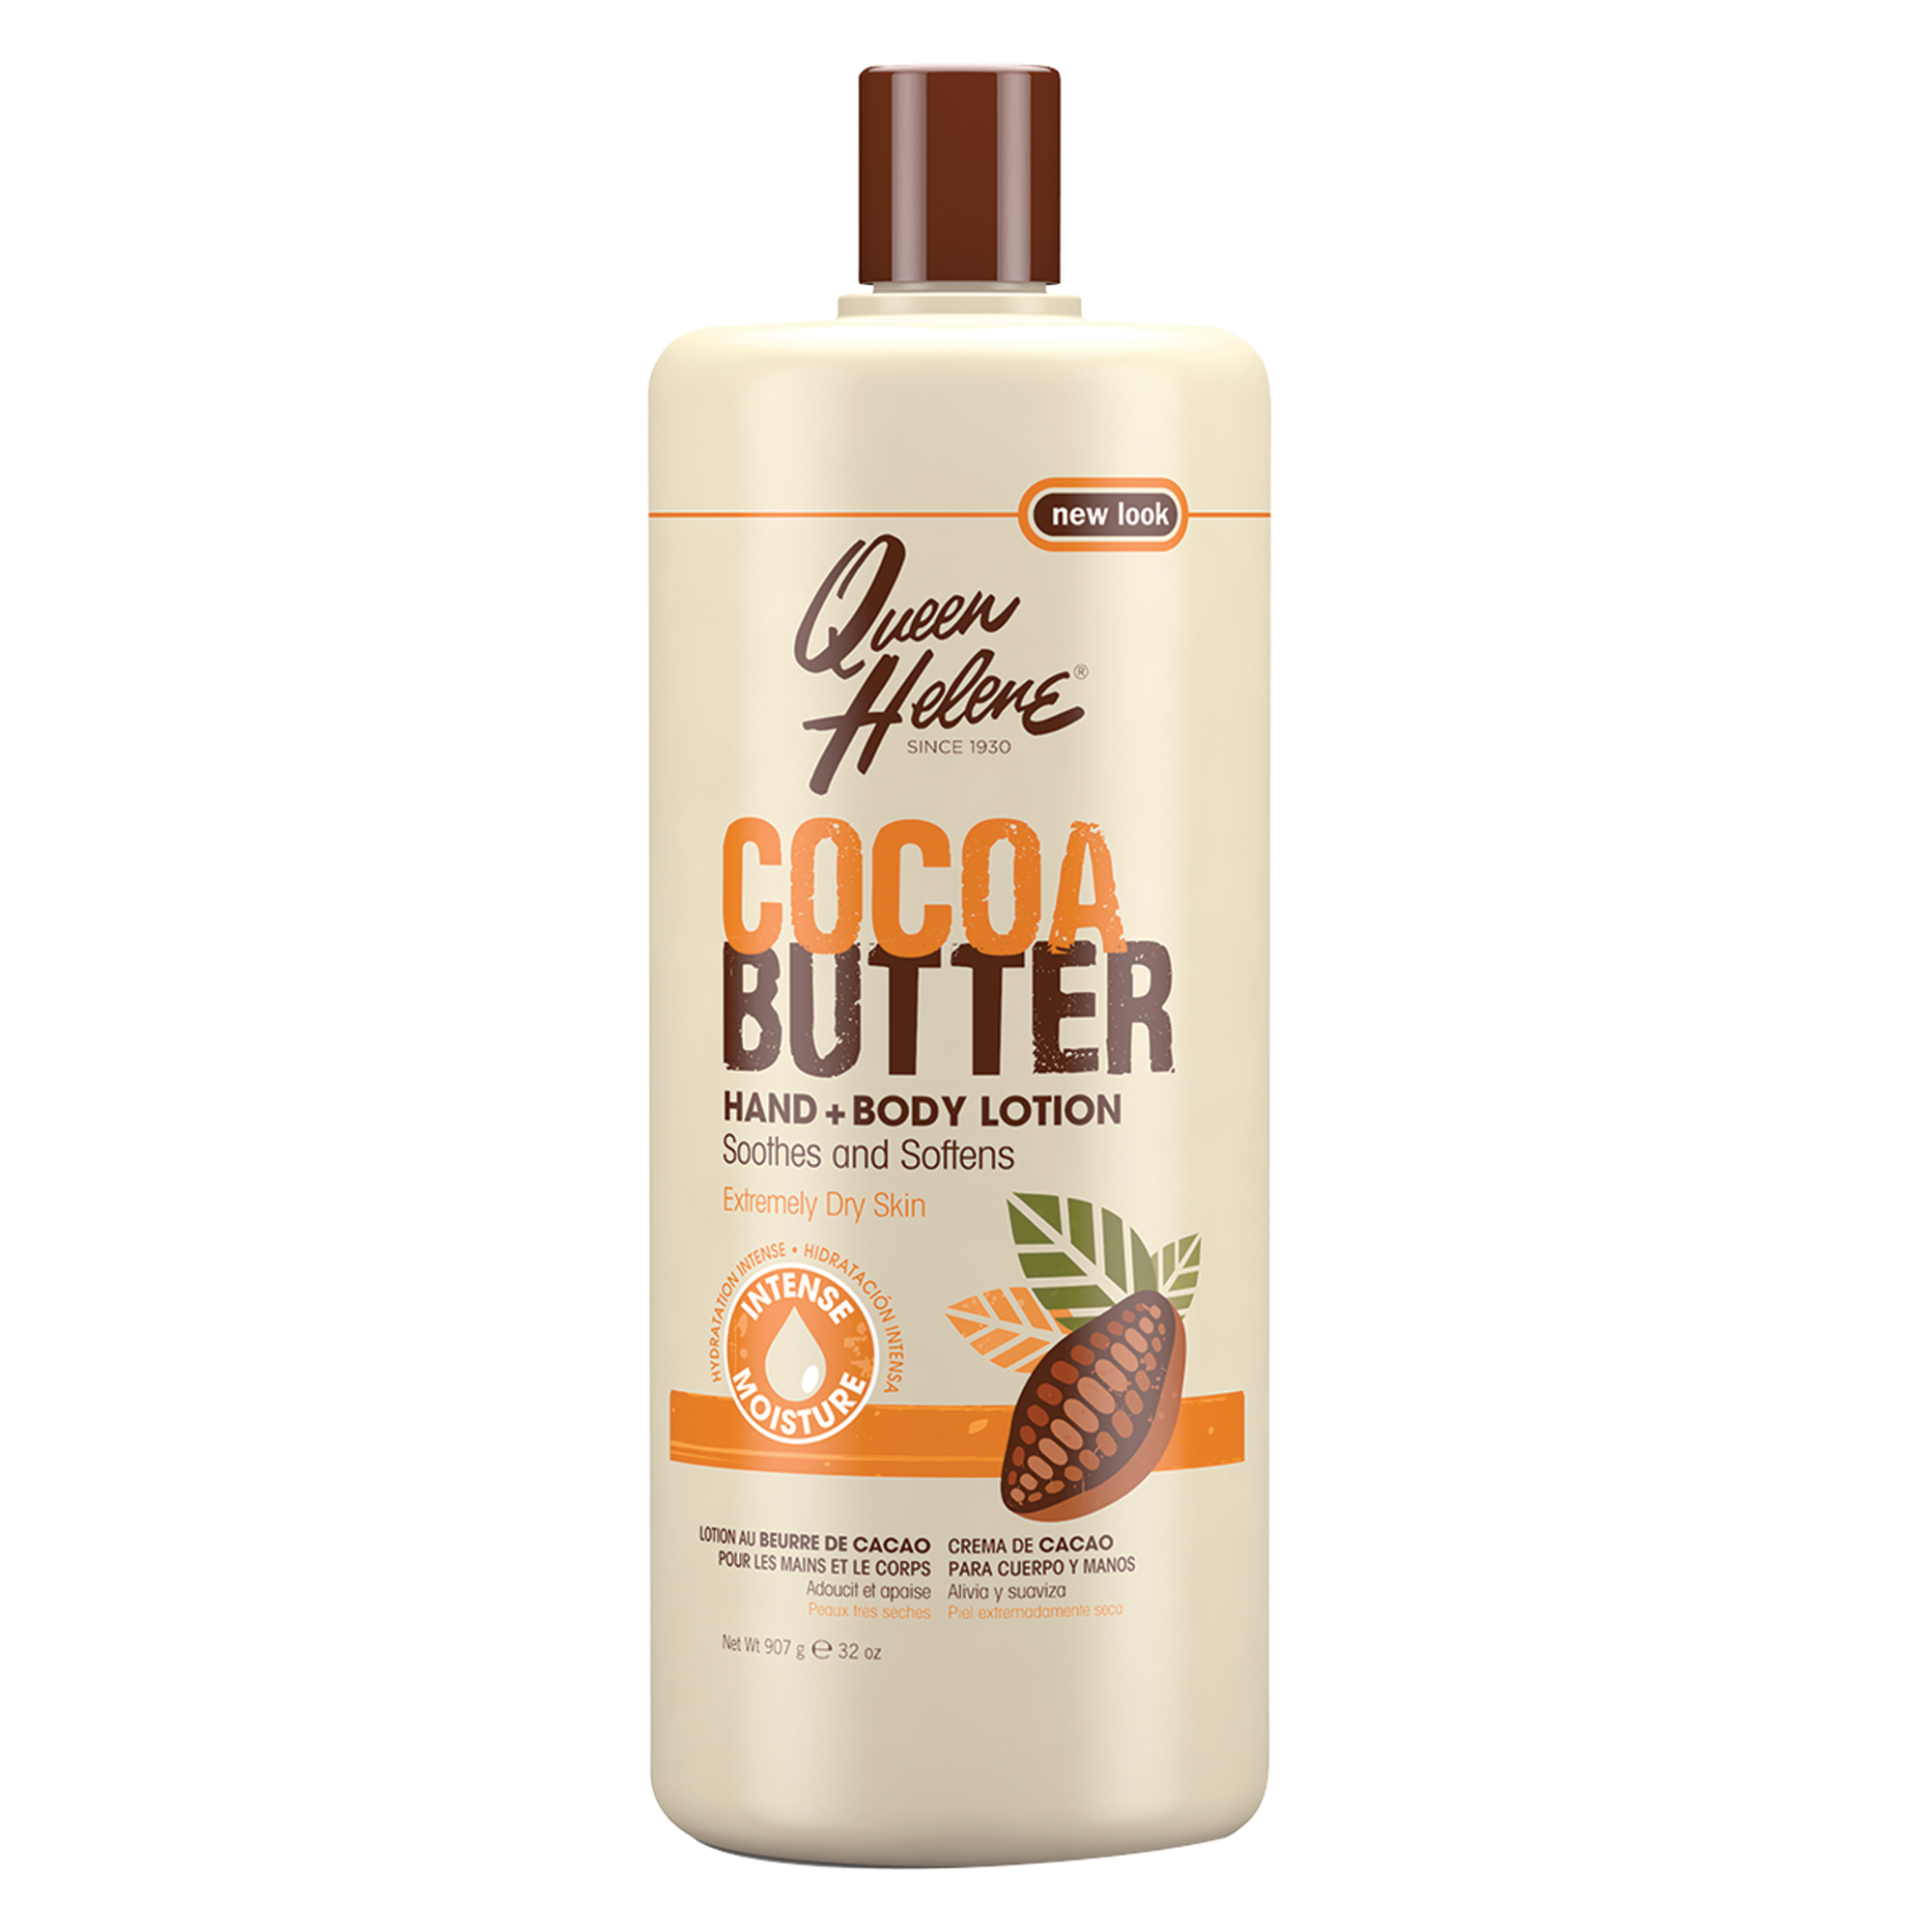 Cocoa Butter Hand + Body Lotion